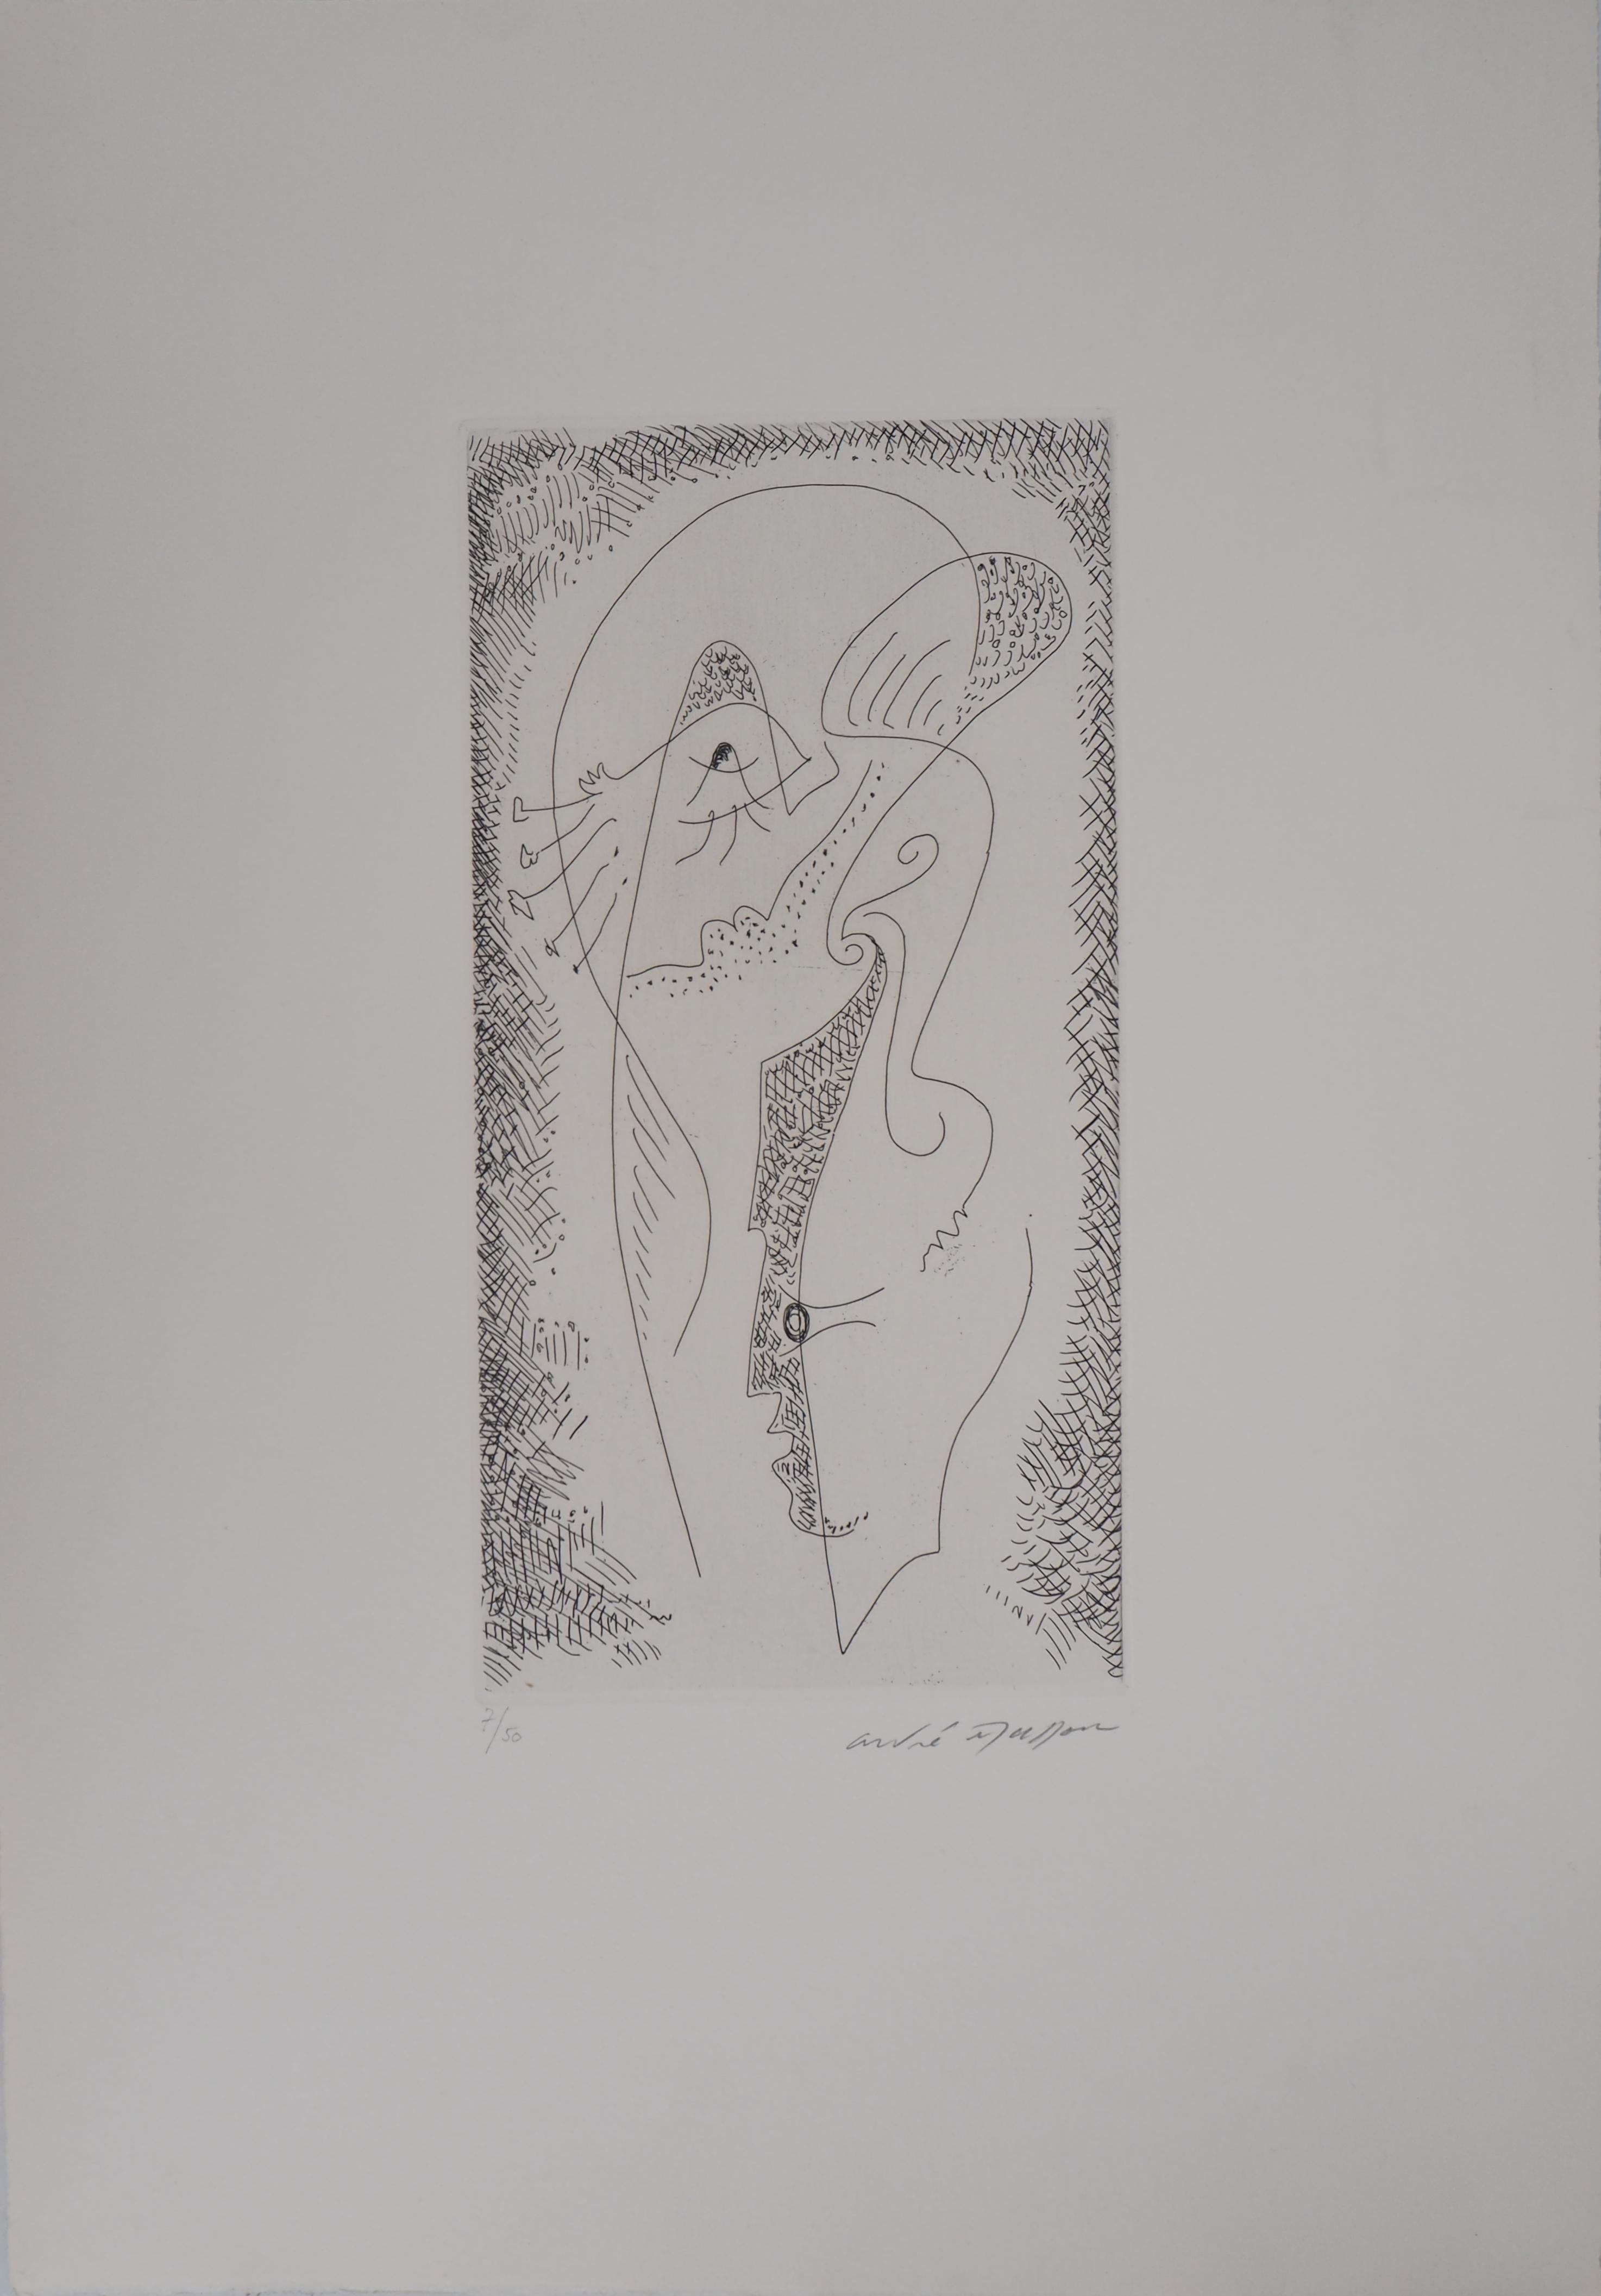 The Surrealist Dream - Original handsigned etching - Ltd /50 - Modern Print by André Masson